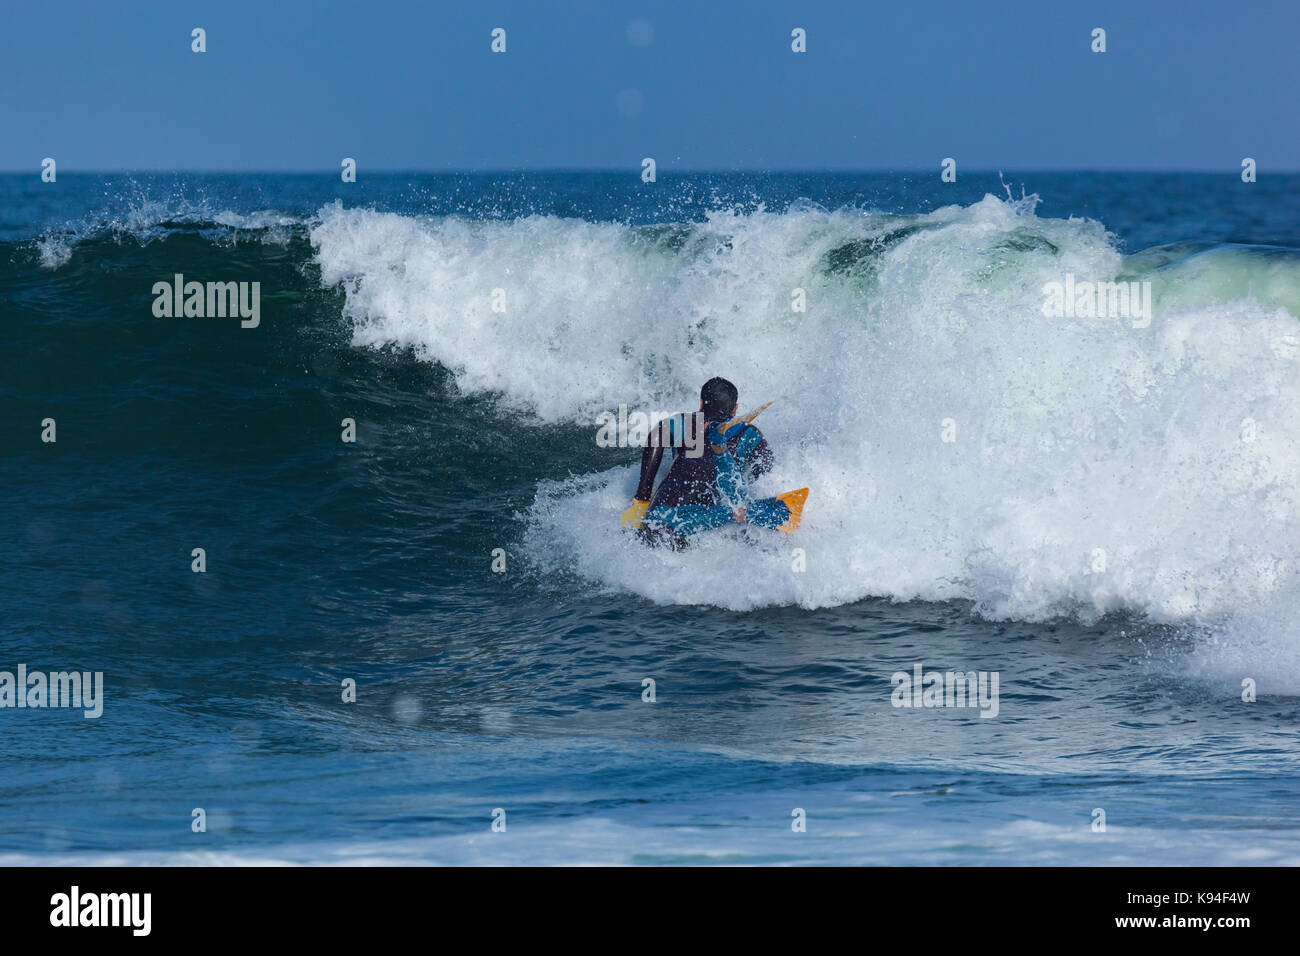 DEAL, NEW JERSEY - September 16, 2017: A bodyboarder enjoys surfing the rough surf created by Tropical Storm Jose Stock Photo